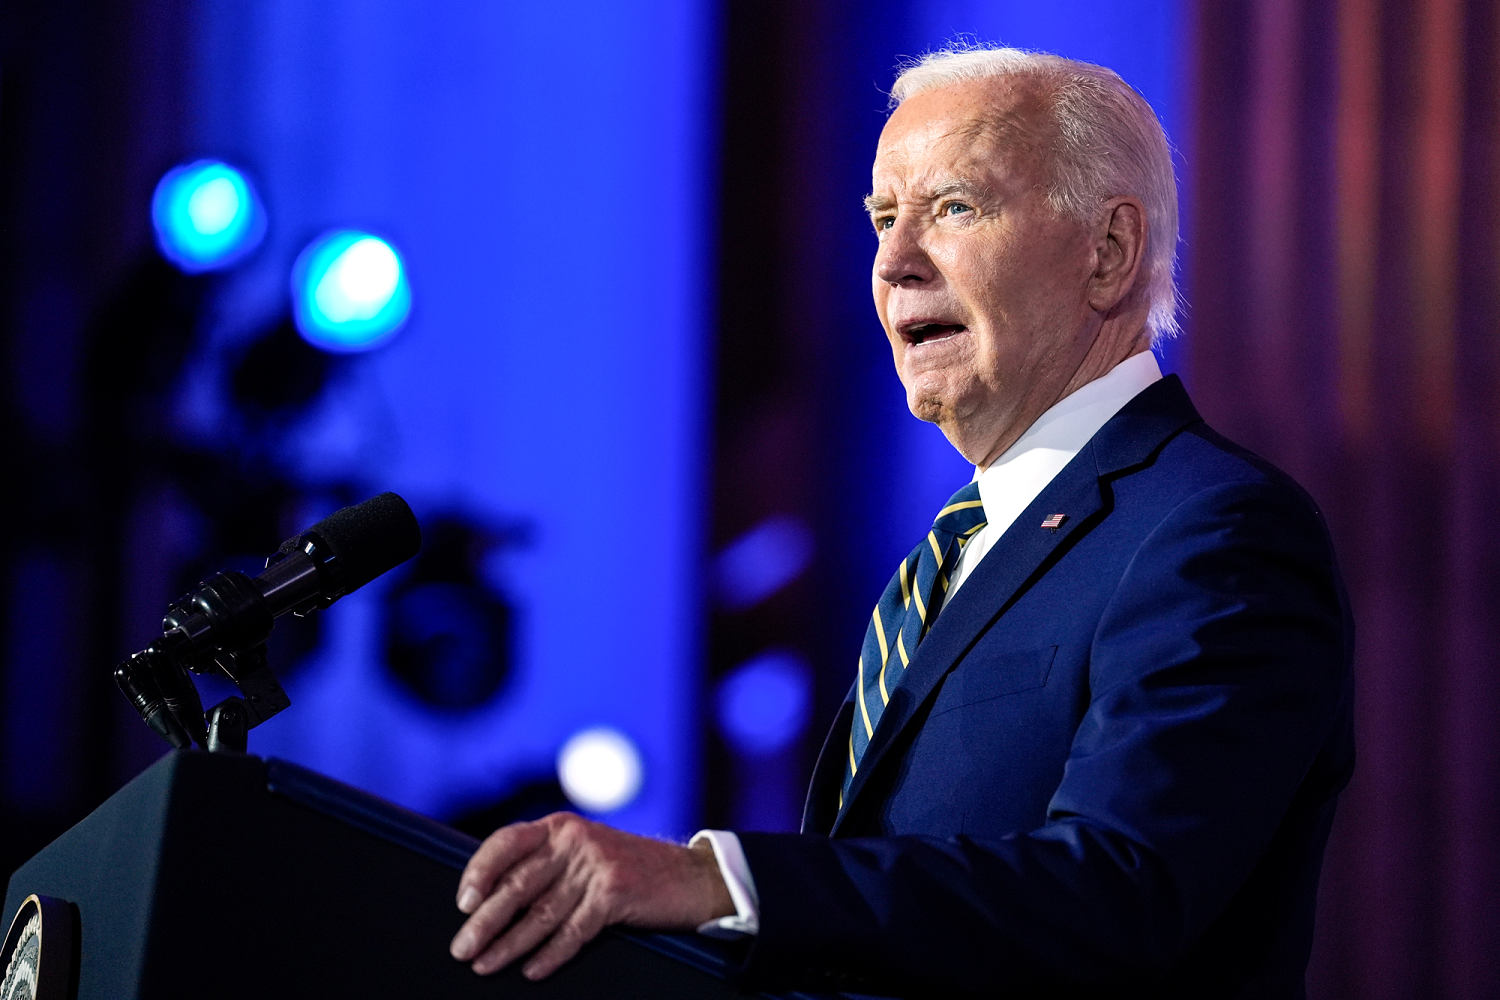 'I'm the most qualified': Biden takes questions about his mental and physical fitness